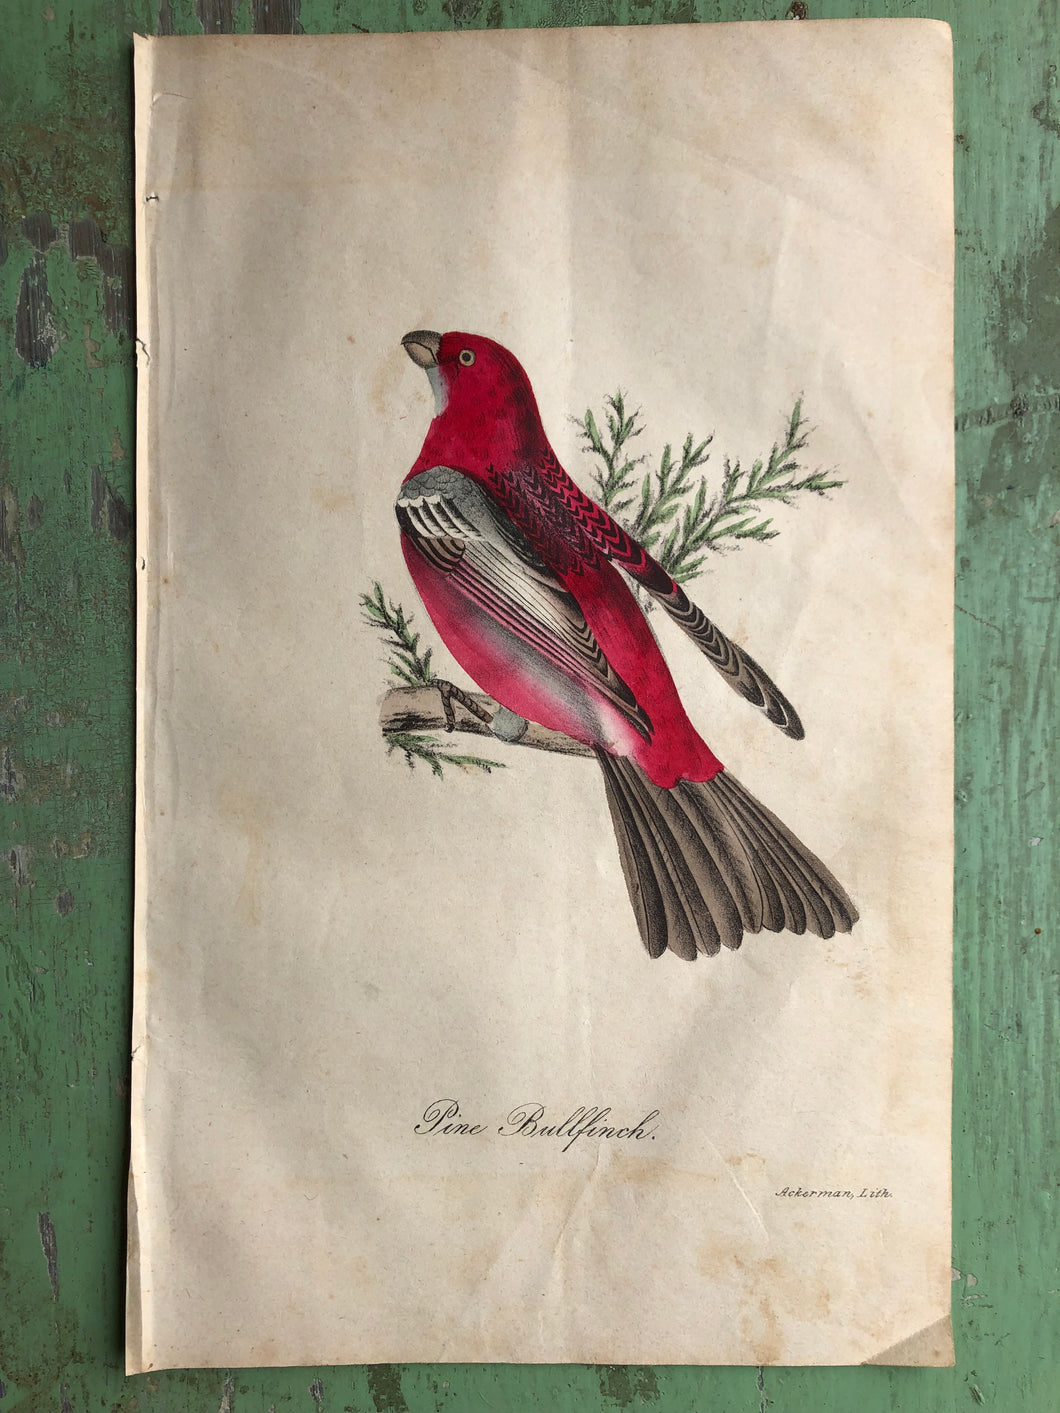 Pine Bullfinch. Hand-Colored Print from 